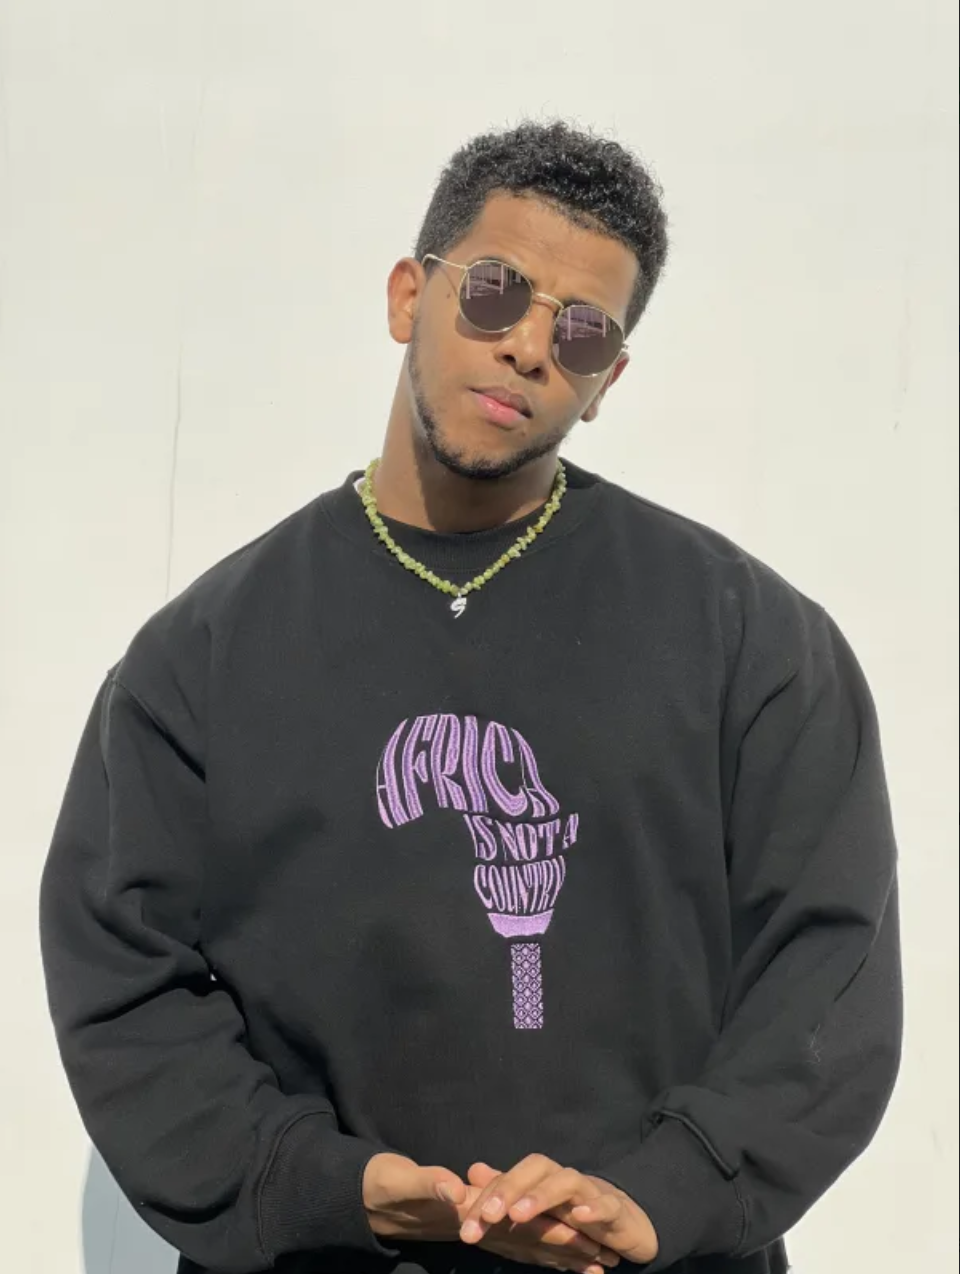 DJ St3v3 Launches A New Merch With The "Africa Is Not A Country" Single